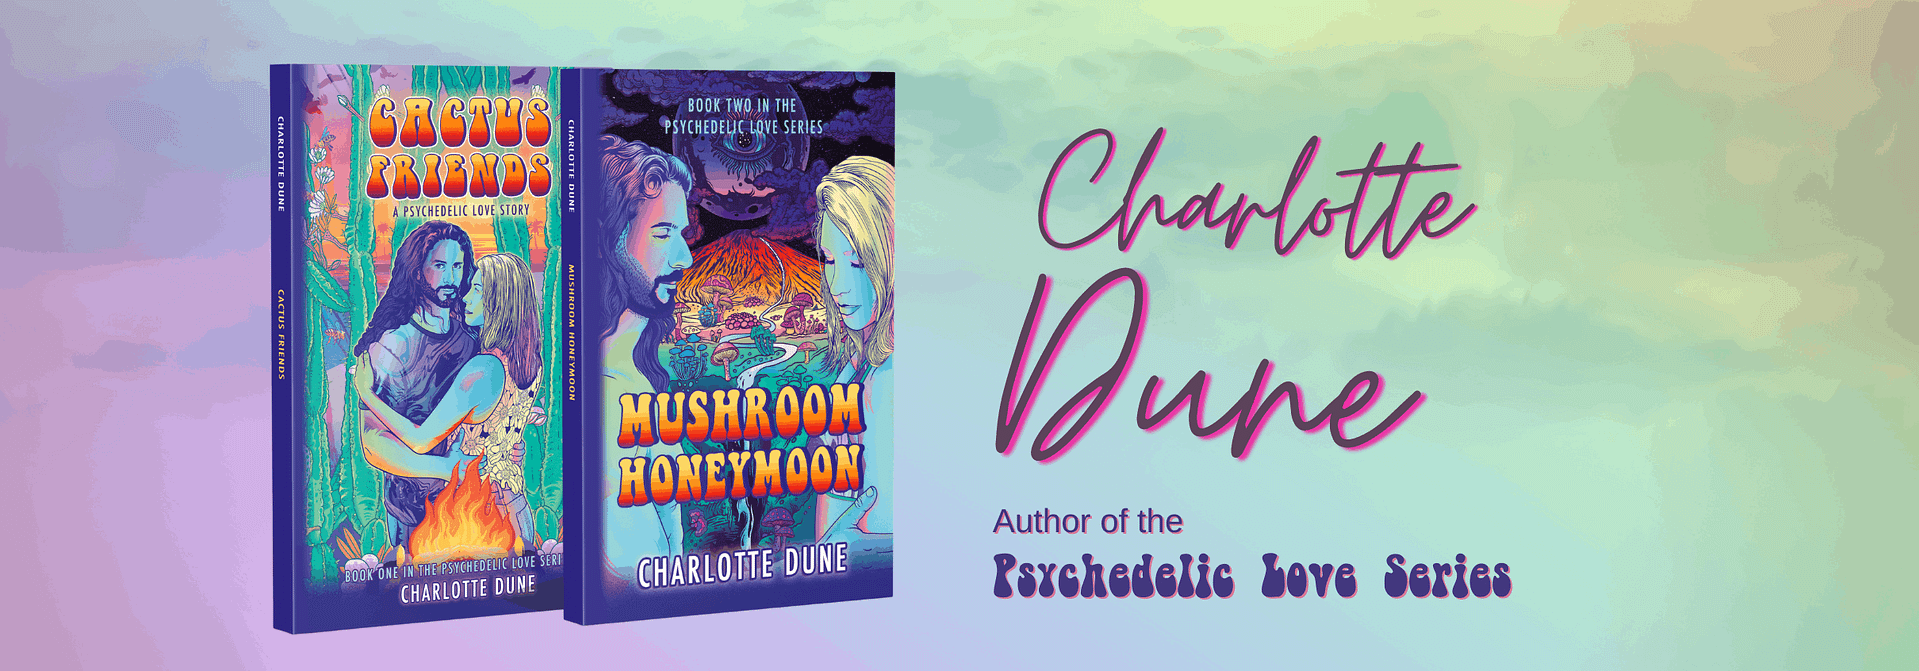 Charlotte Dune author of the Psychedelic Love Series.